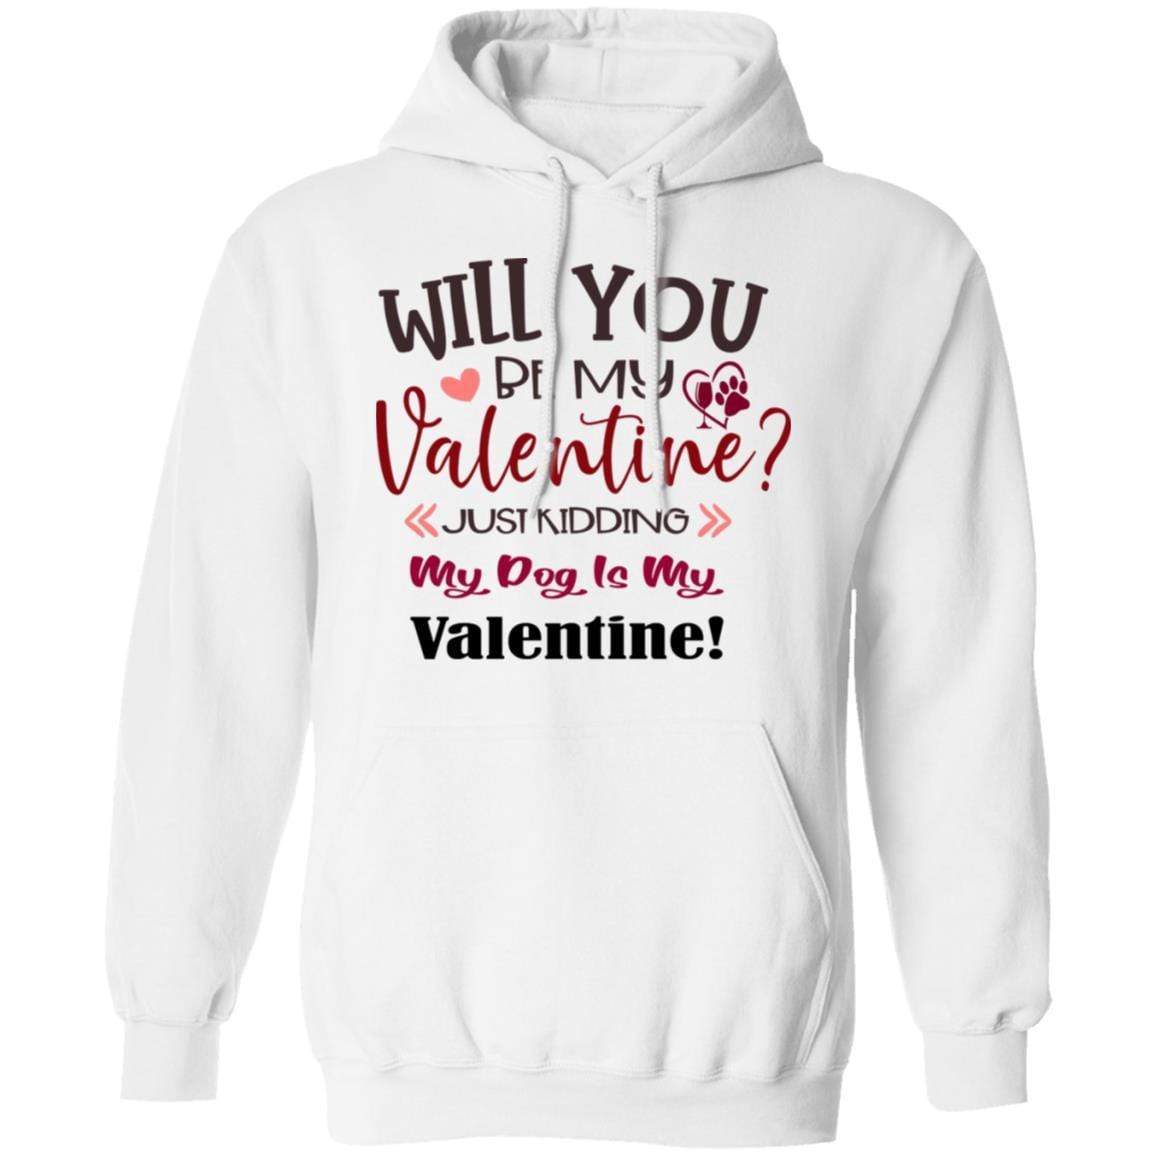 Sweatshirts White / S Winey Bitches Co "Will You Be My Valentine" Pullover Hoodie 8 oz. WineyBitchesCo